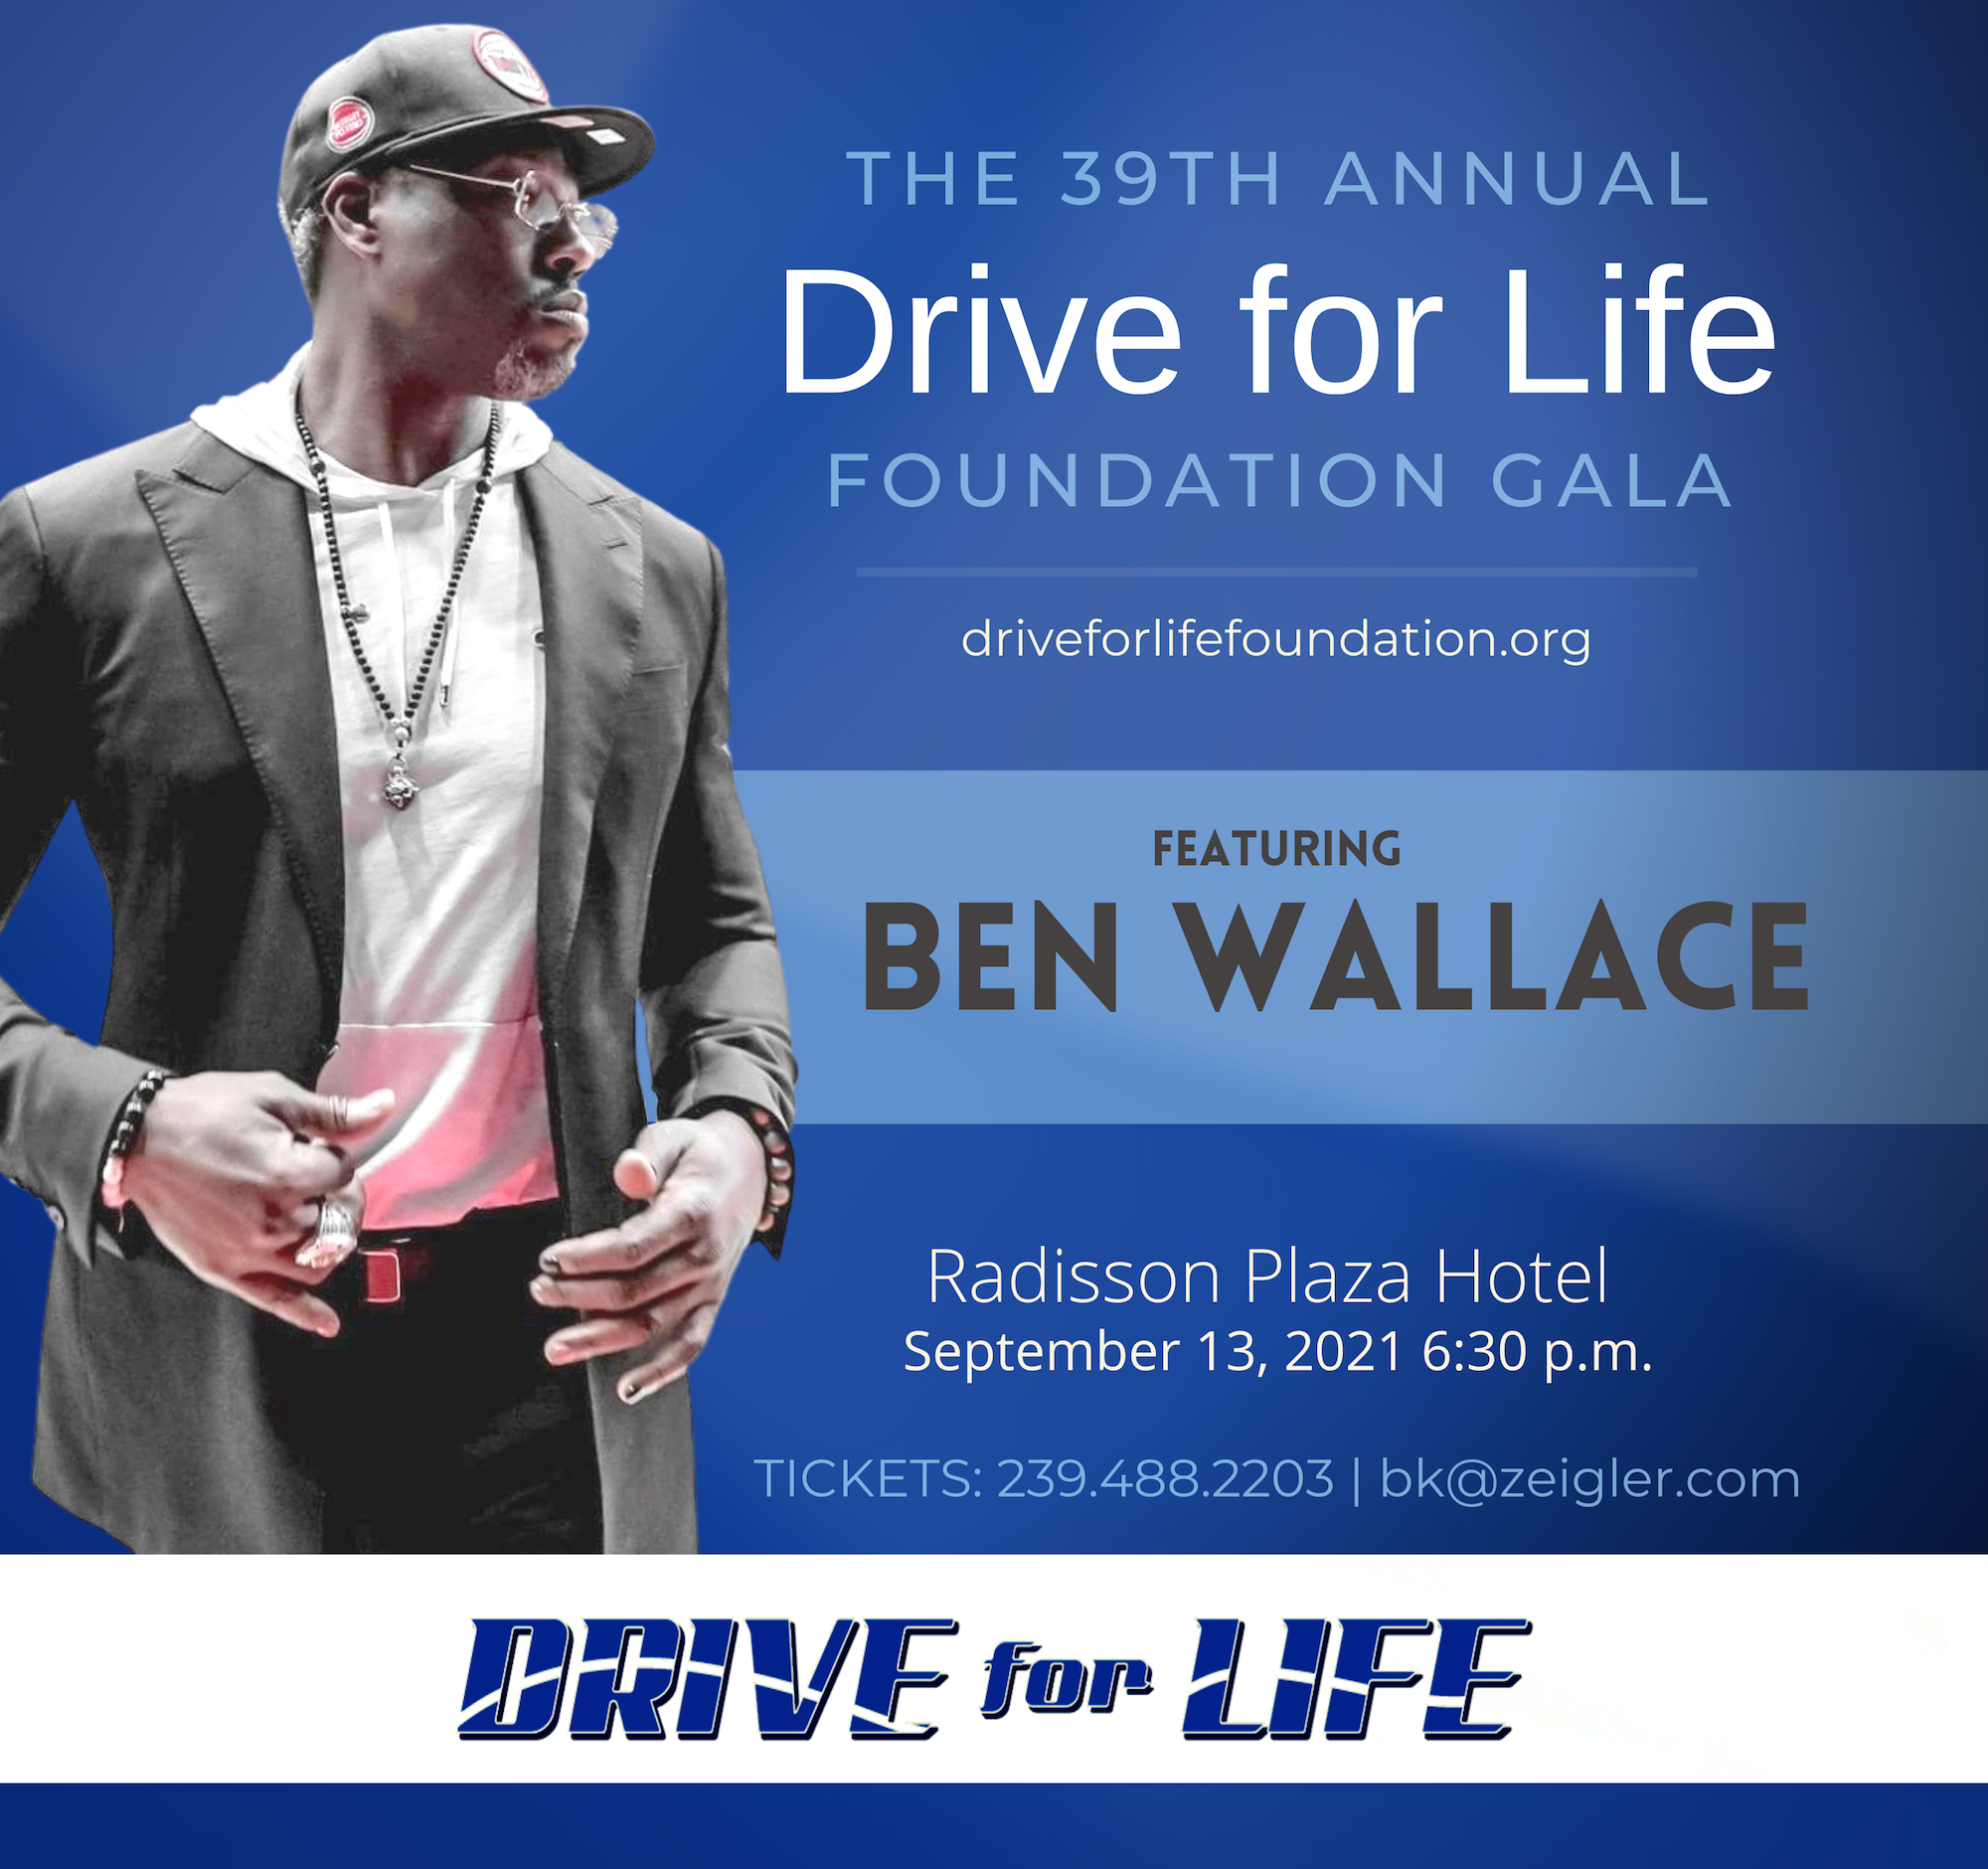 Ben Wallace Joins the 39th Annual Drive for Life Foundation Gala as Special Guest Speaker